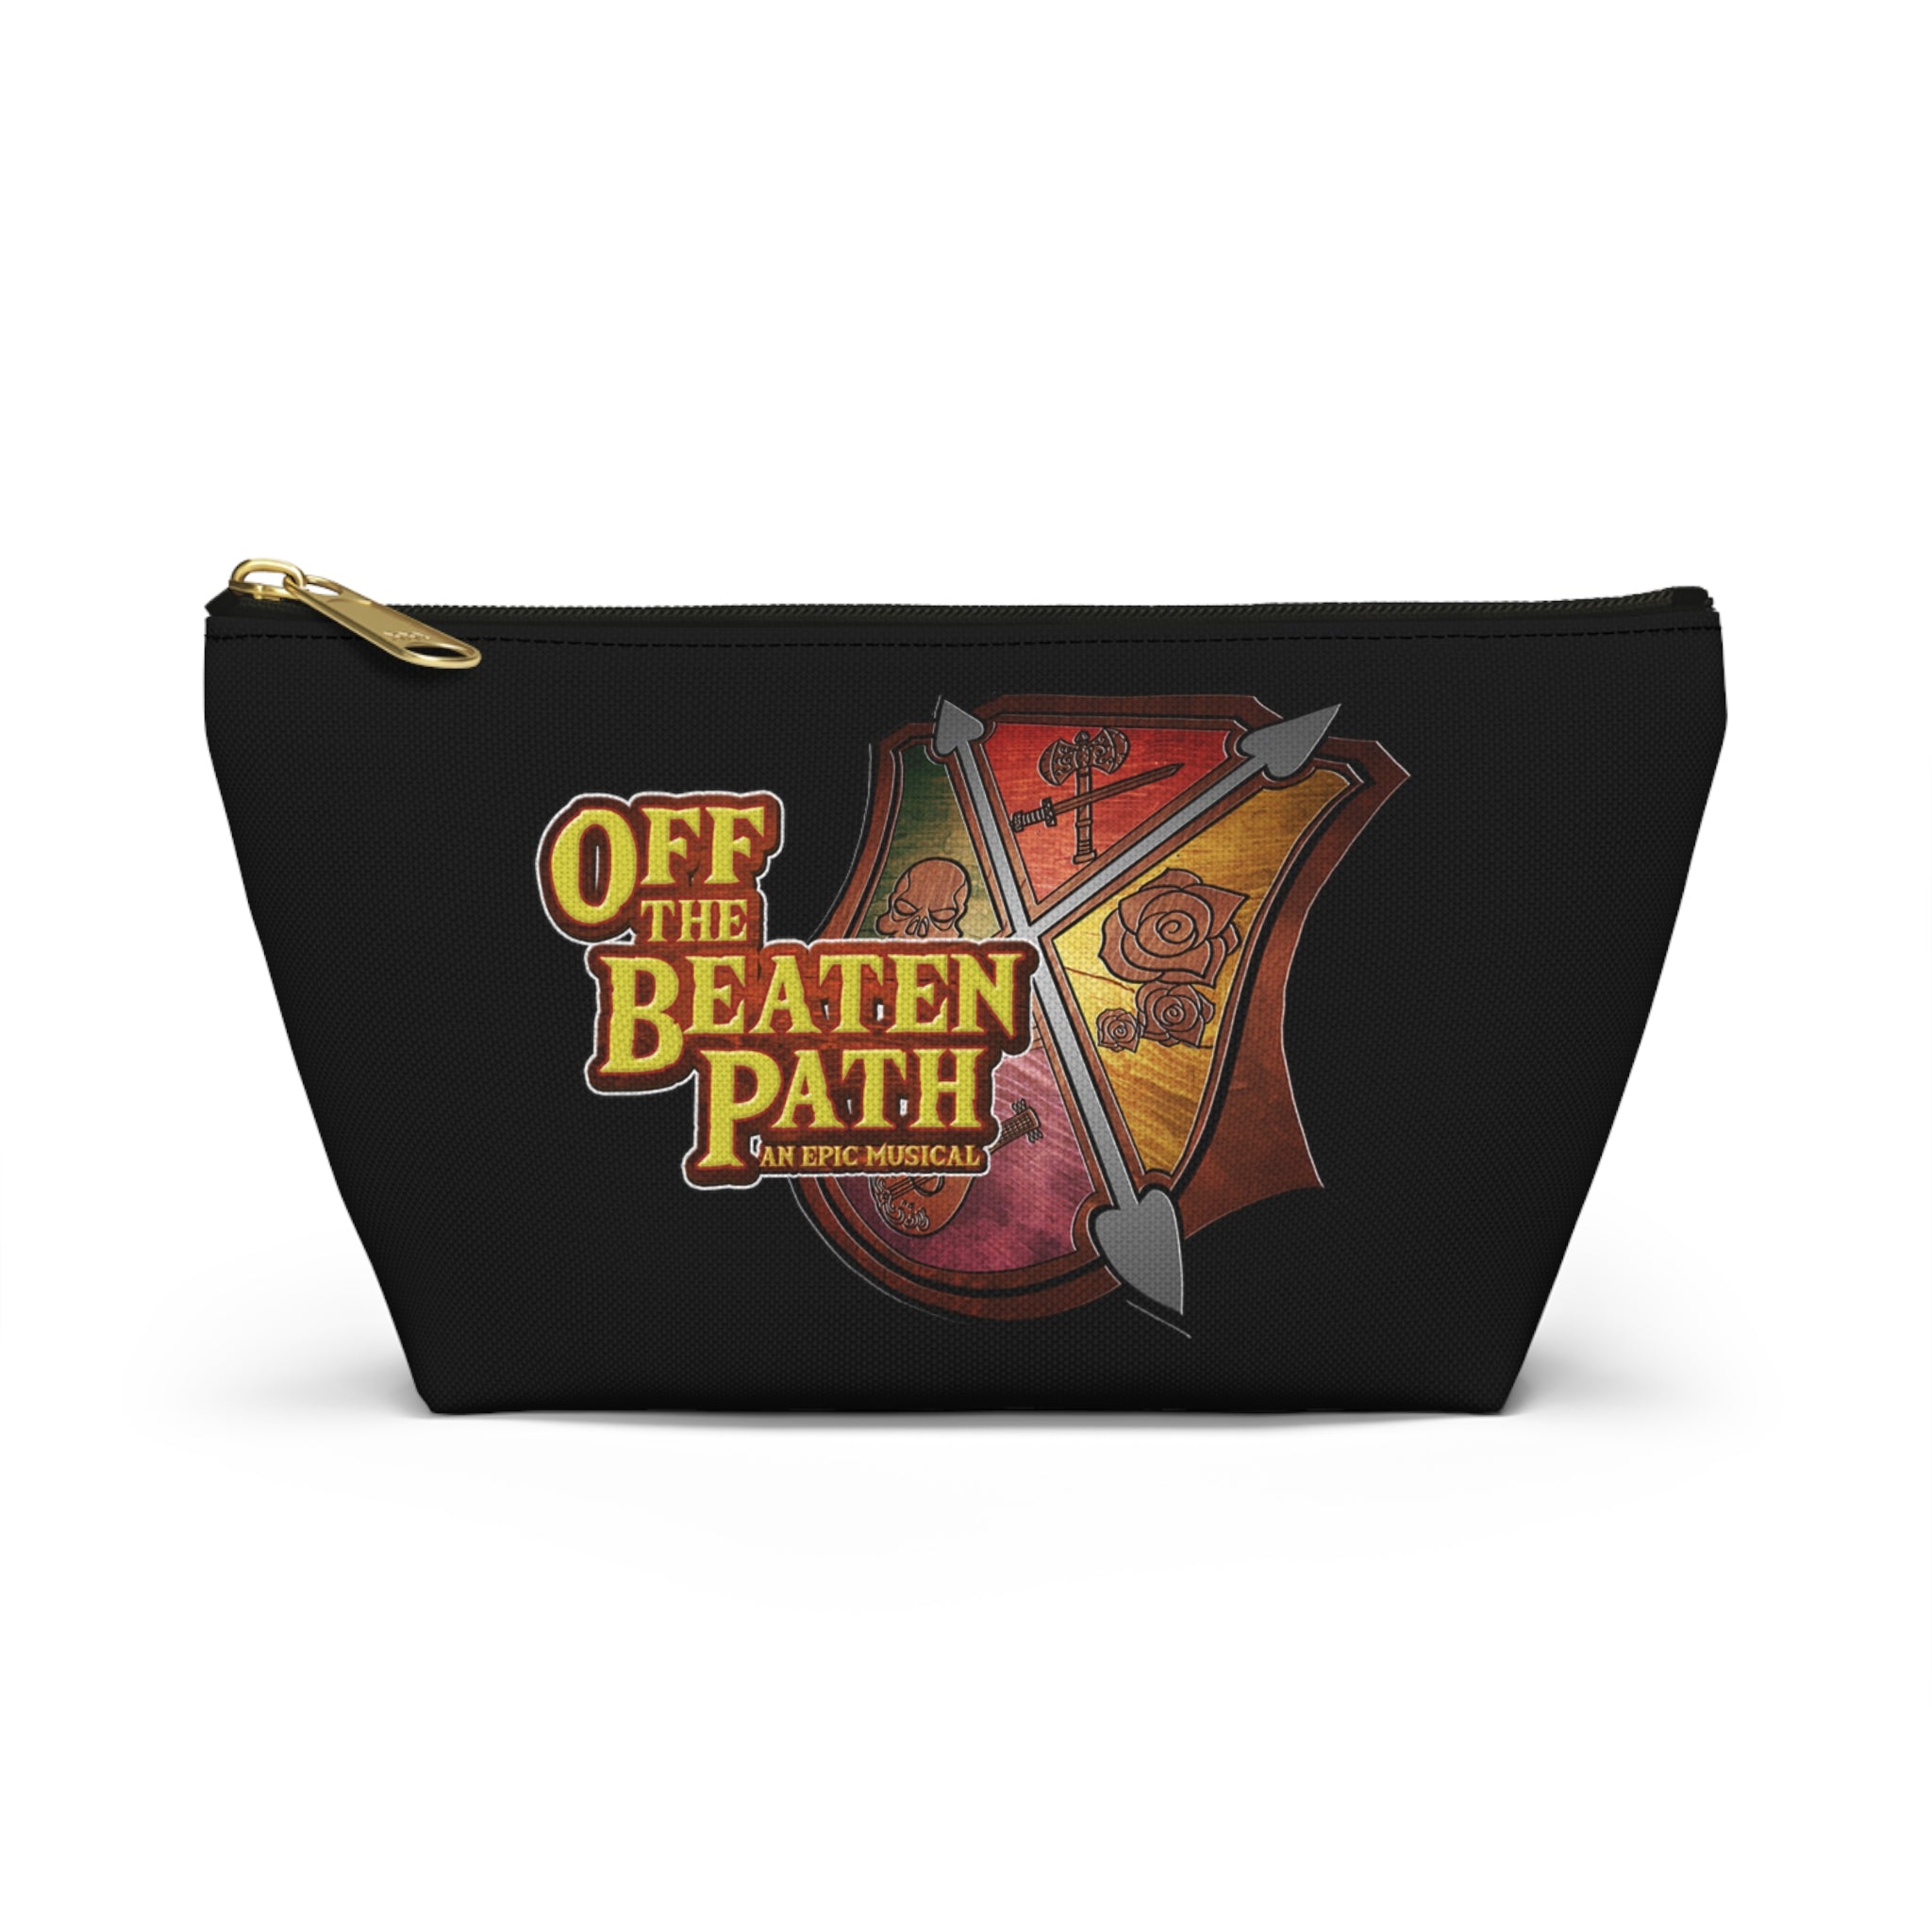 OBP Crest Accessory Pouch - Black